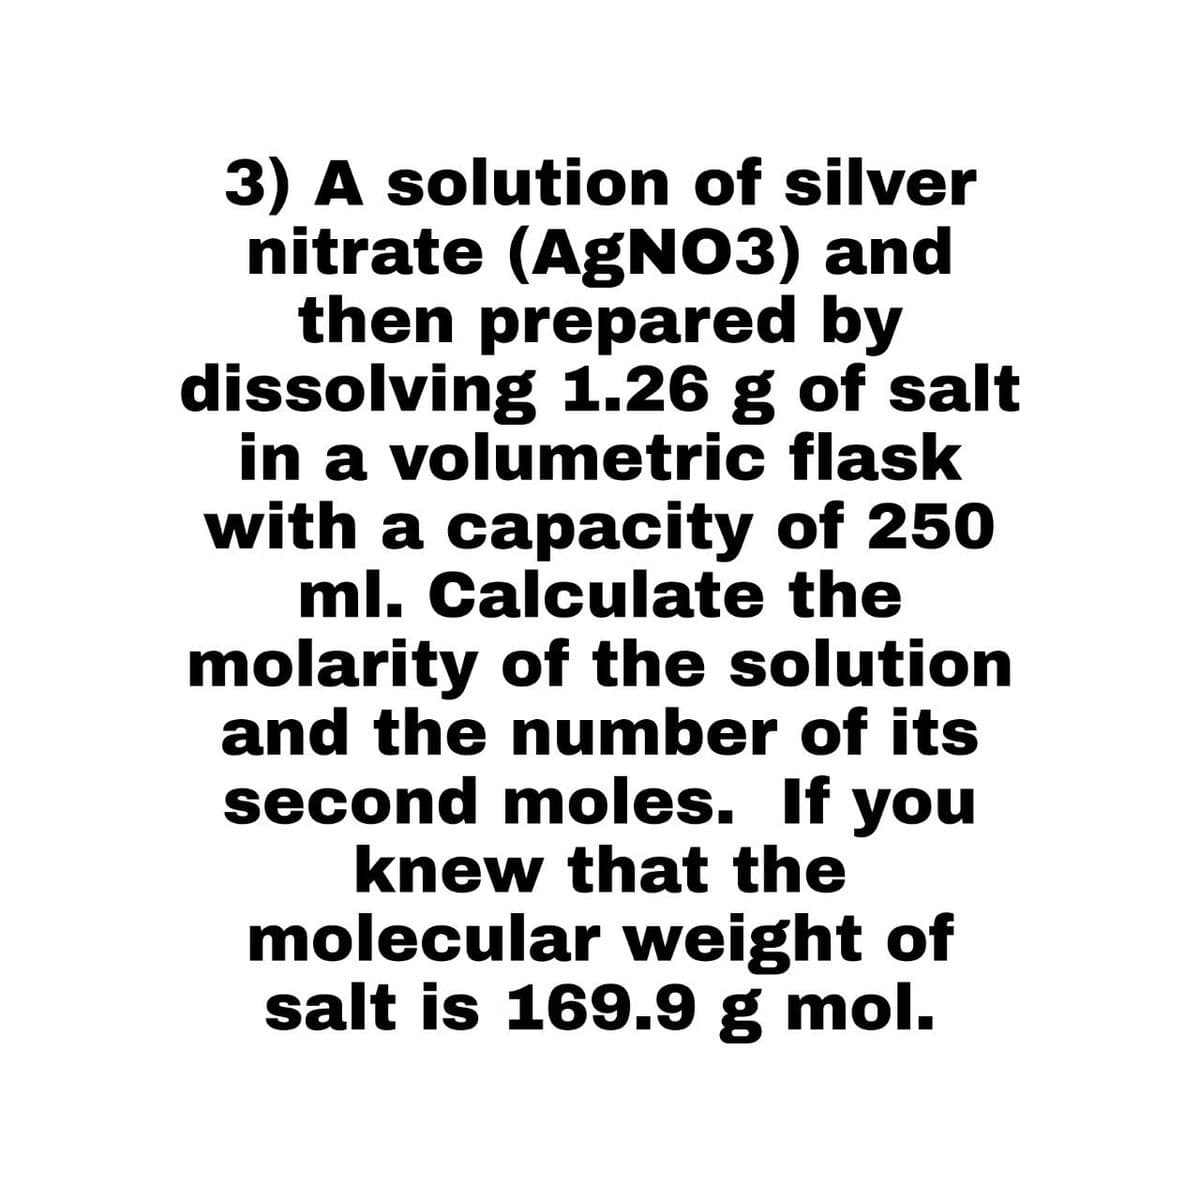 3) A solution of silver
nitrate (AgNO3) and
then prepared by
dissolving 1.26 g of salt
in a volumetric flask
with a capacity of 250
ml. Calculate the
molarity of the solution
and the number of its
second moles. If you
knew that the
molecular weight of
salt is 169.9 g mol.
